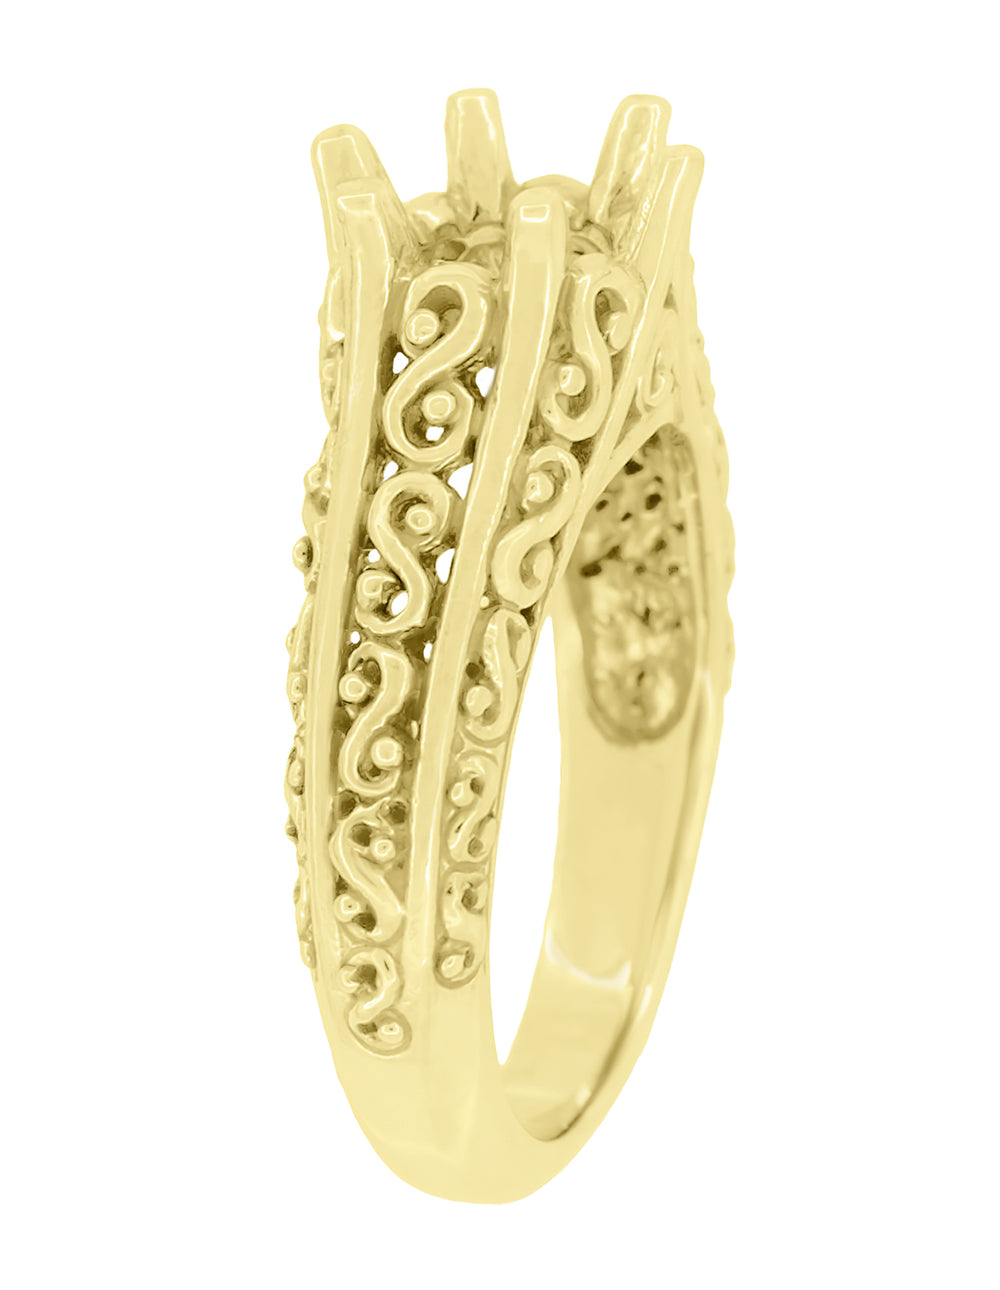 Flowing Scrolls Edwardian 14K Yellow Gold Filigree Antique Style Engagement Ring Mounting for a 1.25 - 2.00 Carat Diamond - Item: R1196Y125 - Image: 3